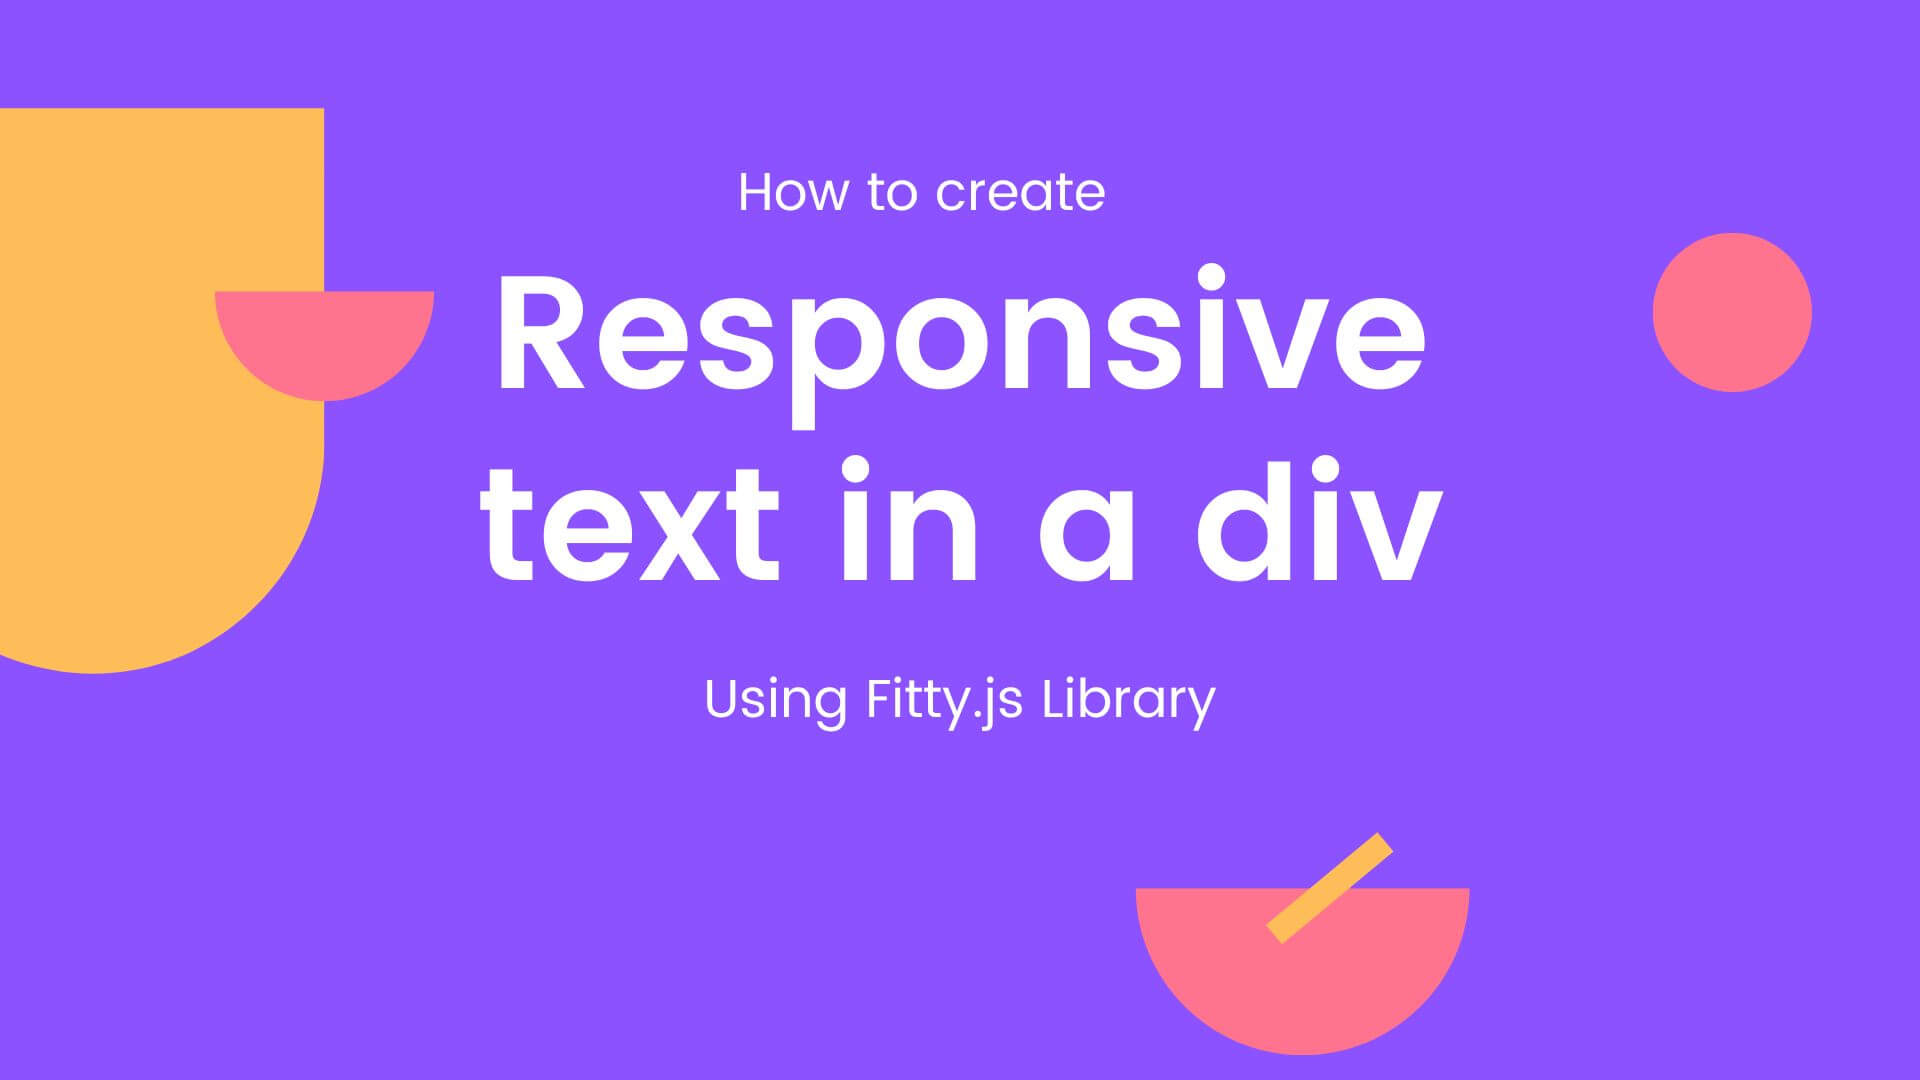 How to create responsive text in a div using the fitty.js library